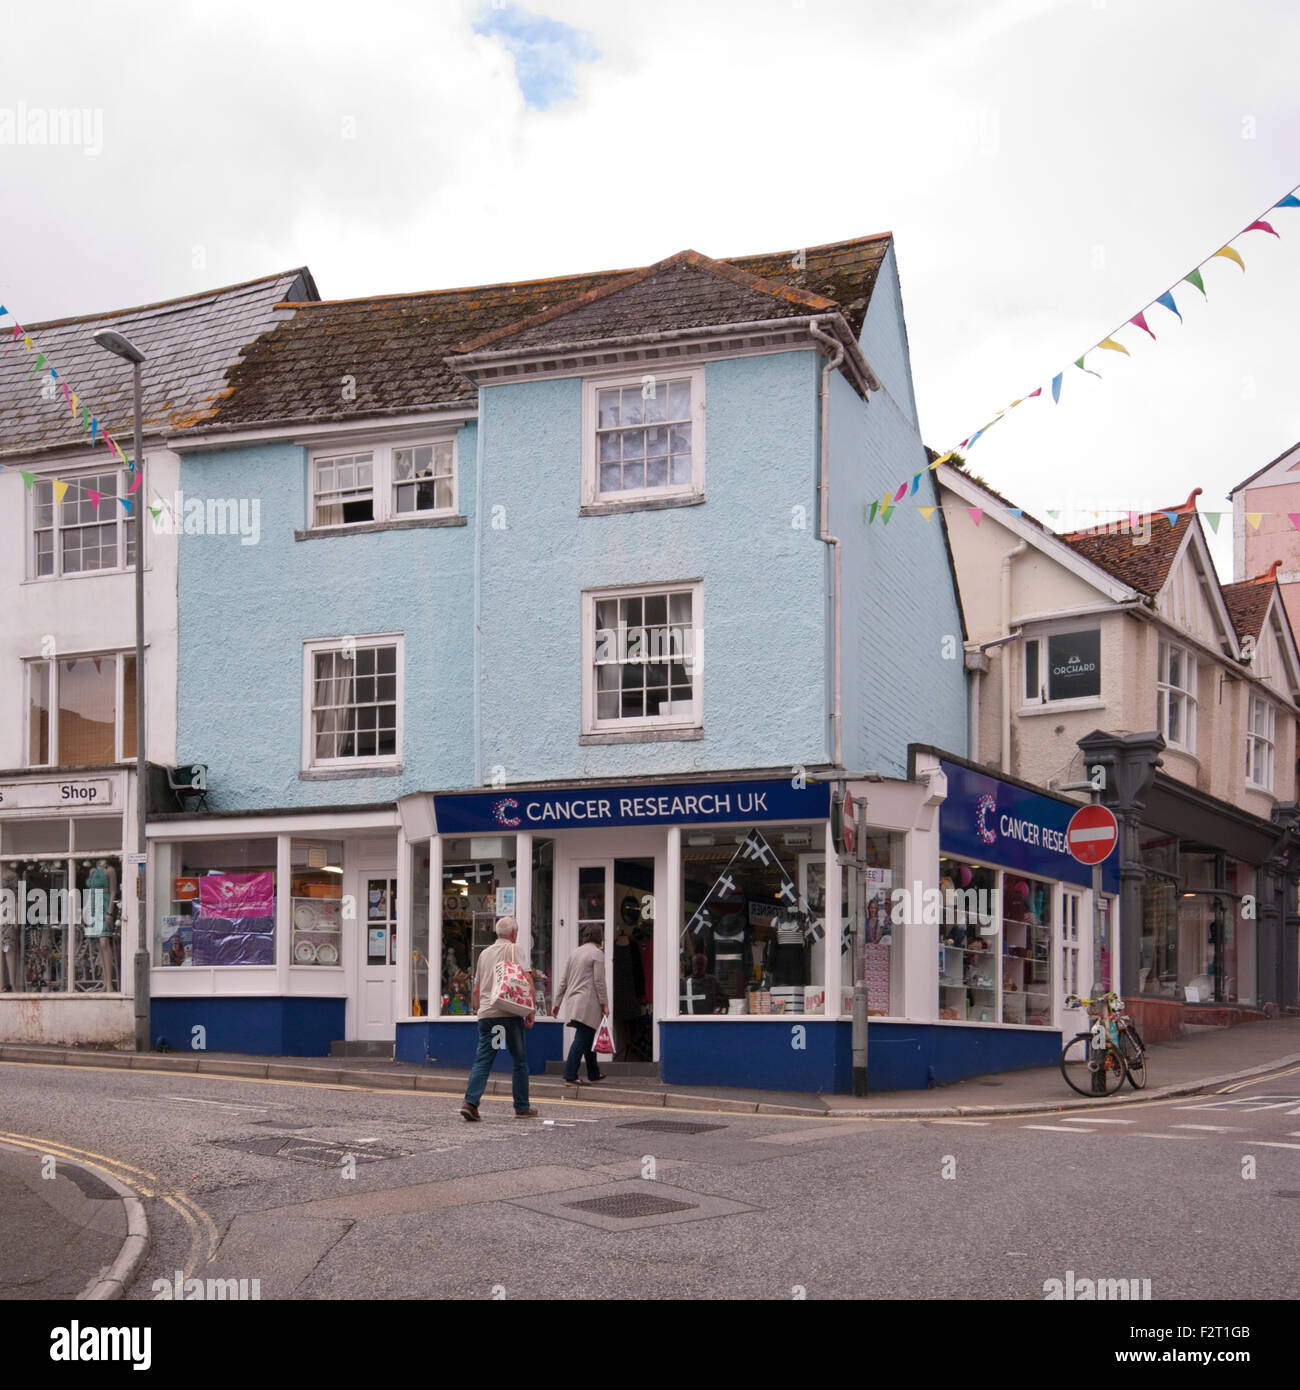 Cancer Research UK Charity Shop Falmouth Cornwall England UK Stockfoto